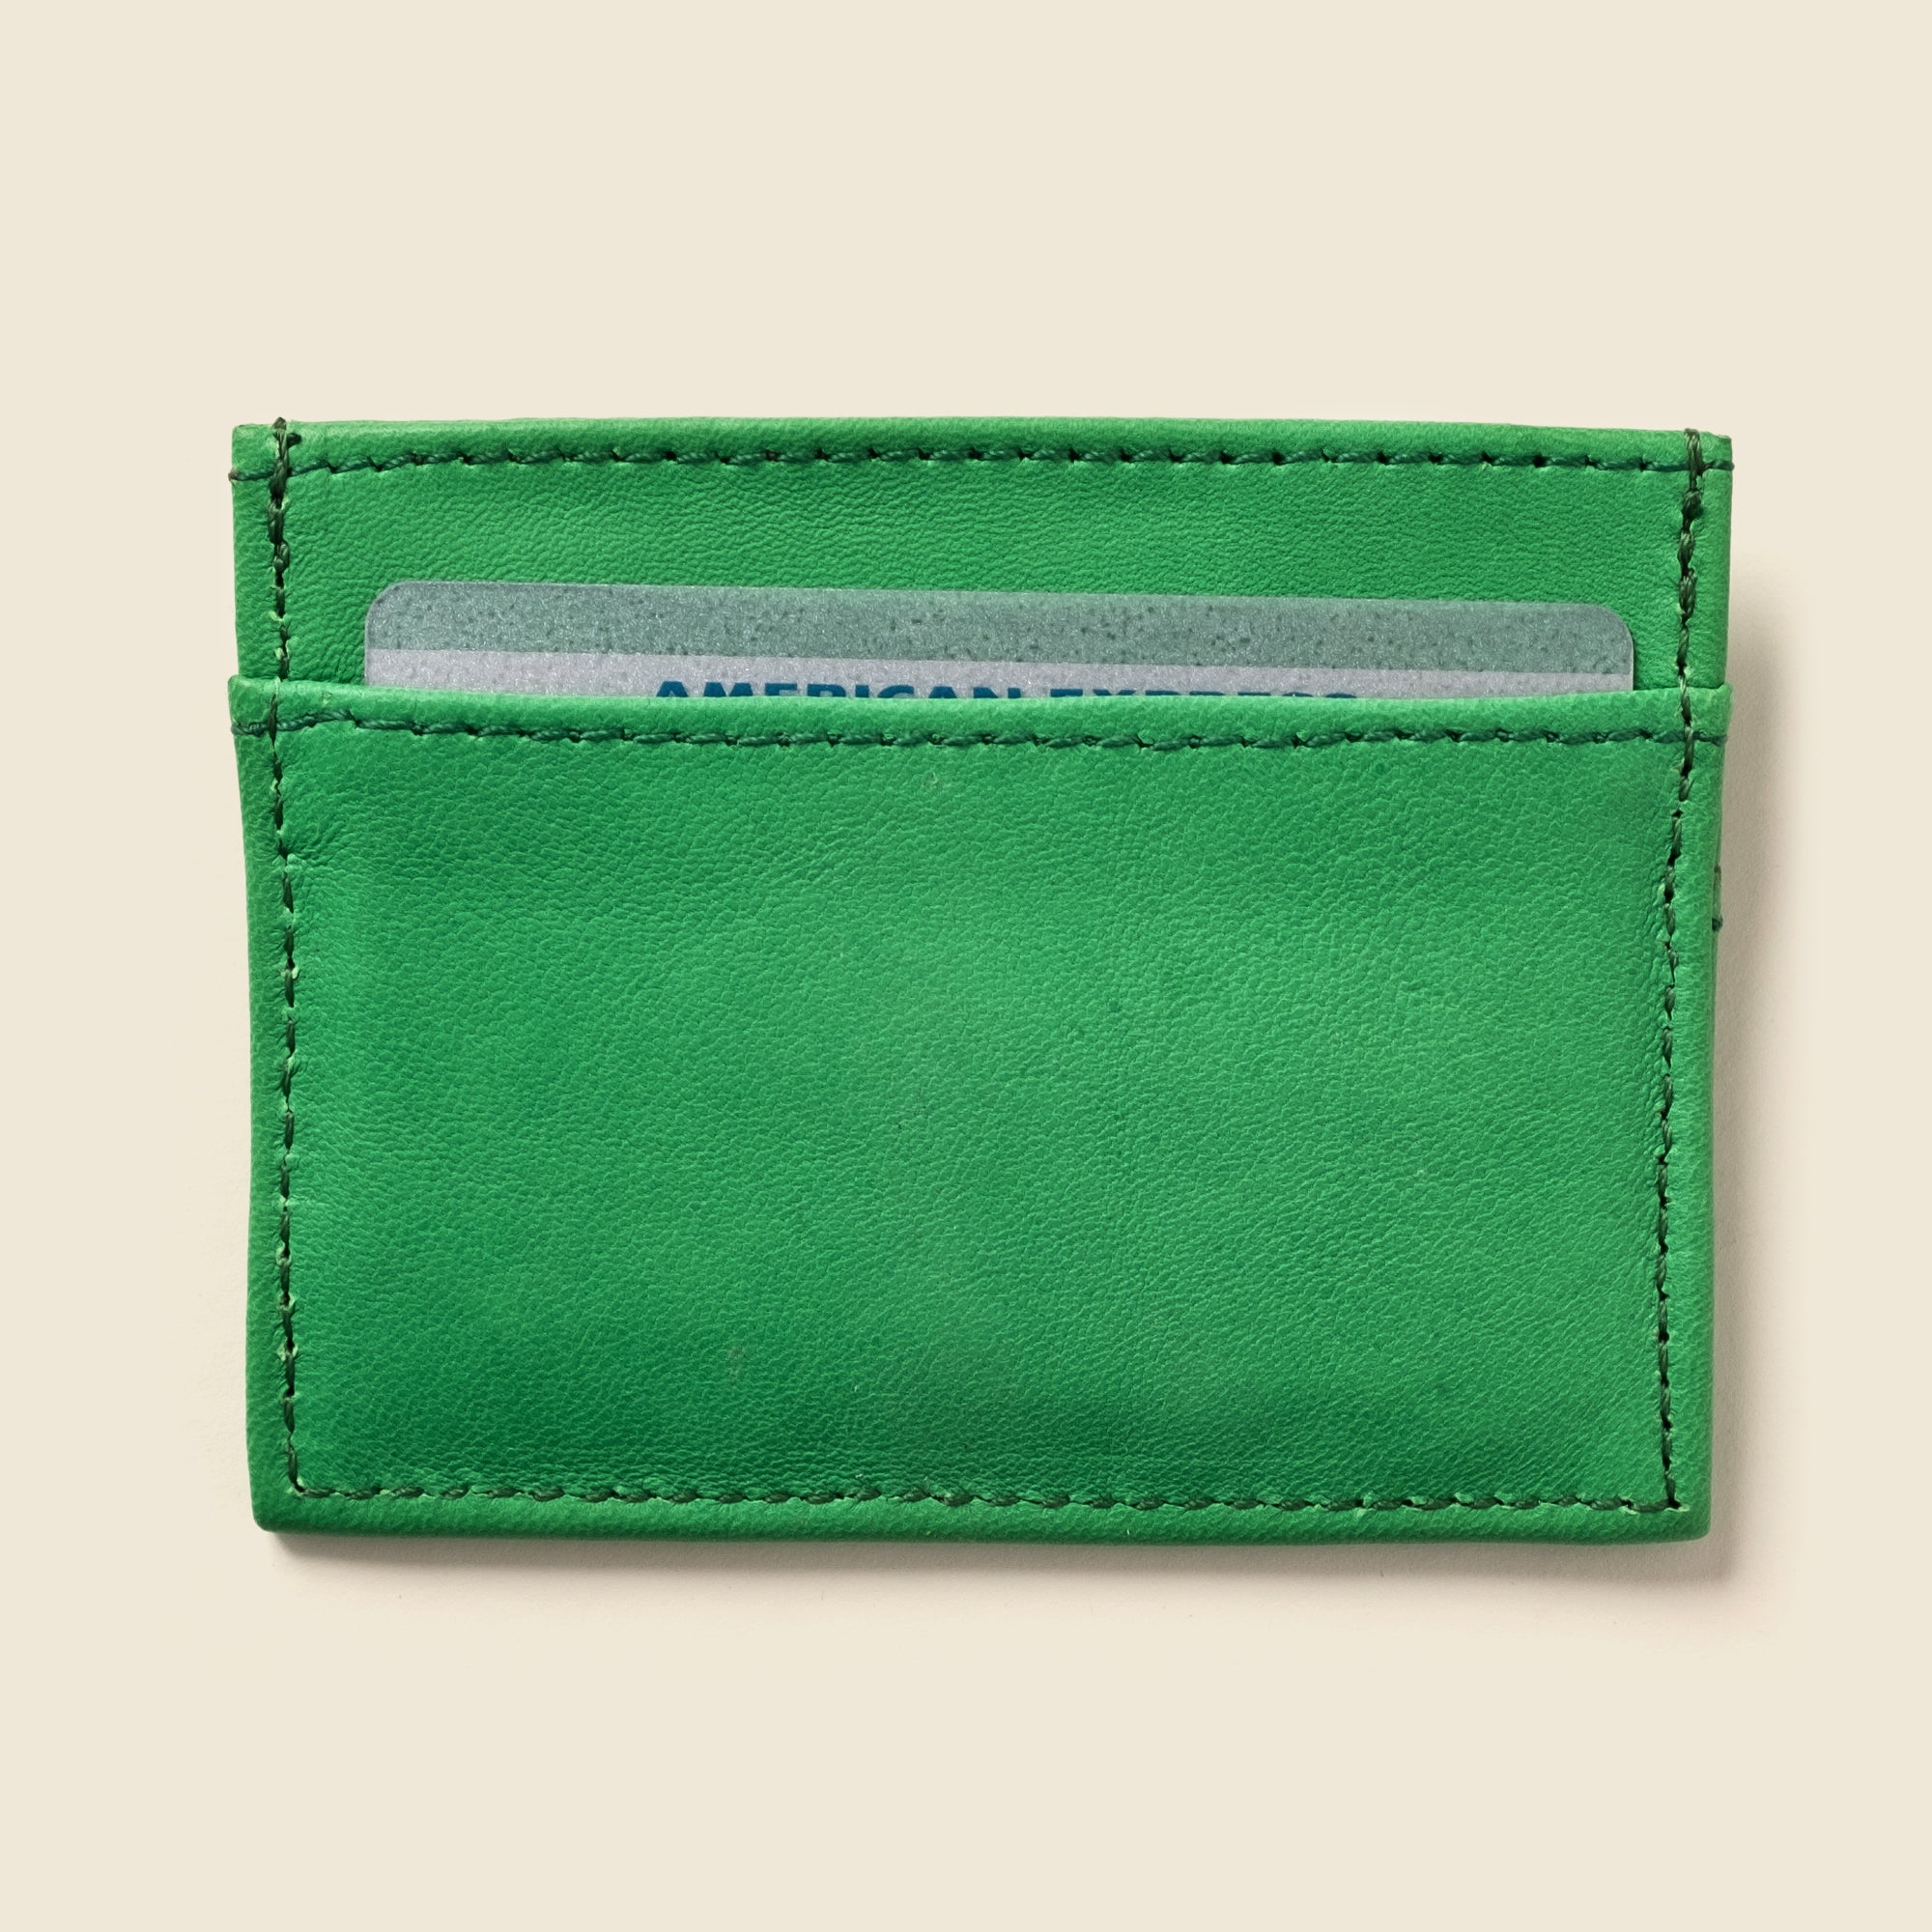 Slim Card Holder Wallet With RFID Protection - Green